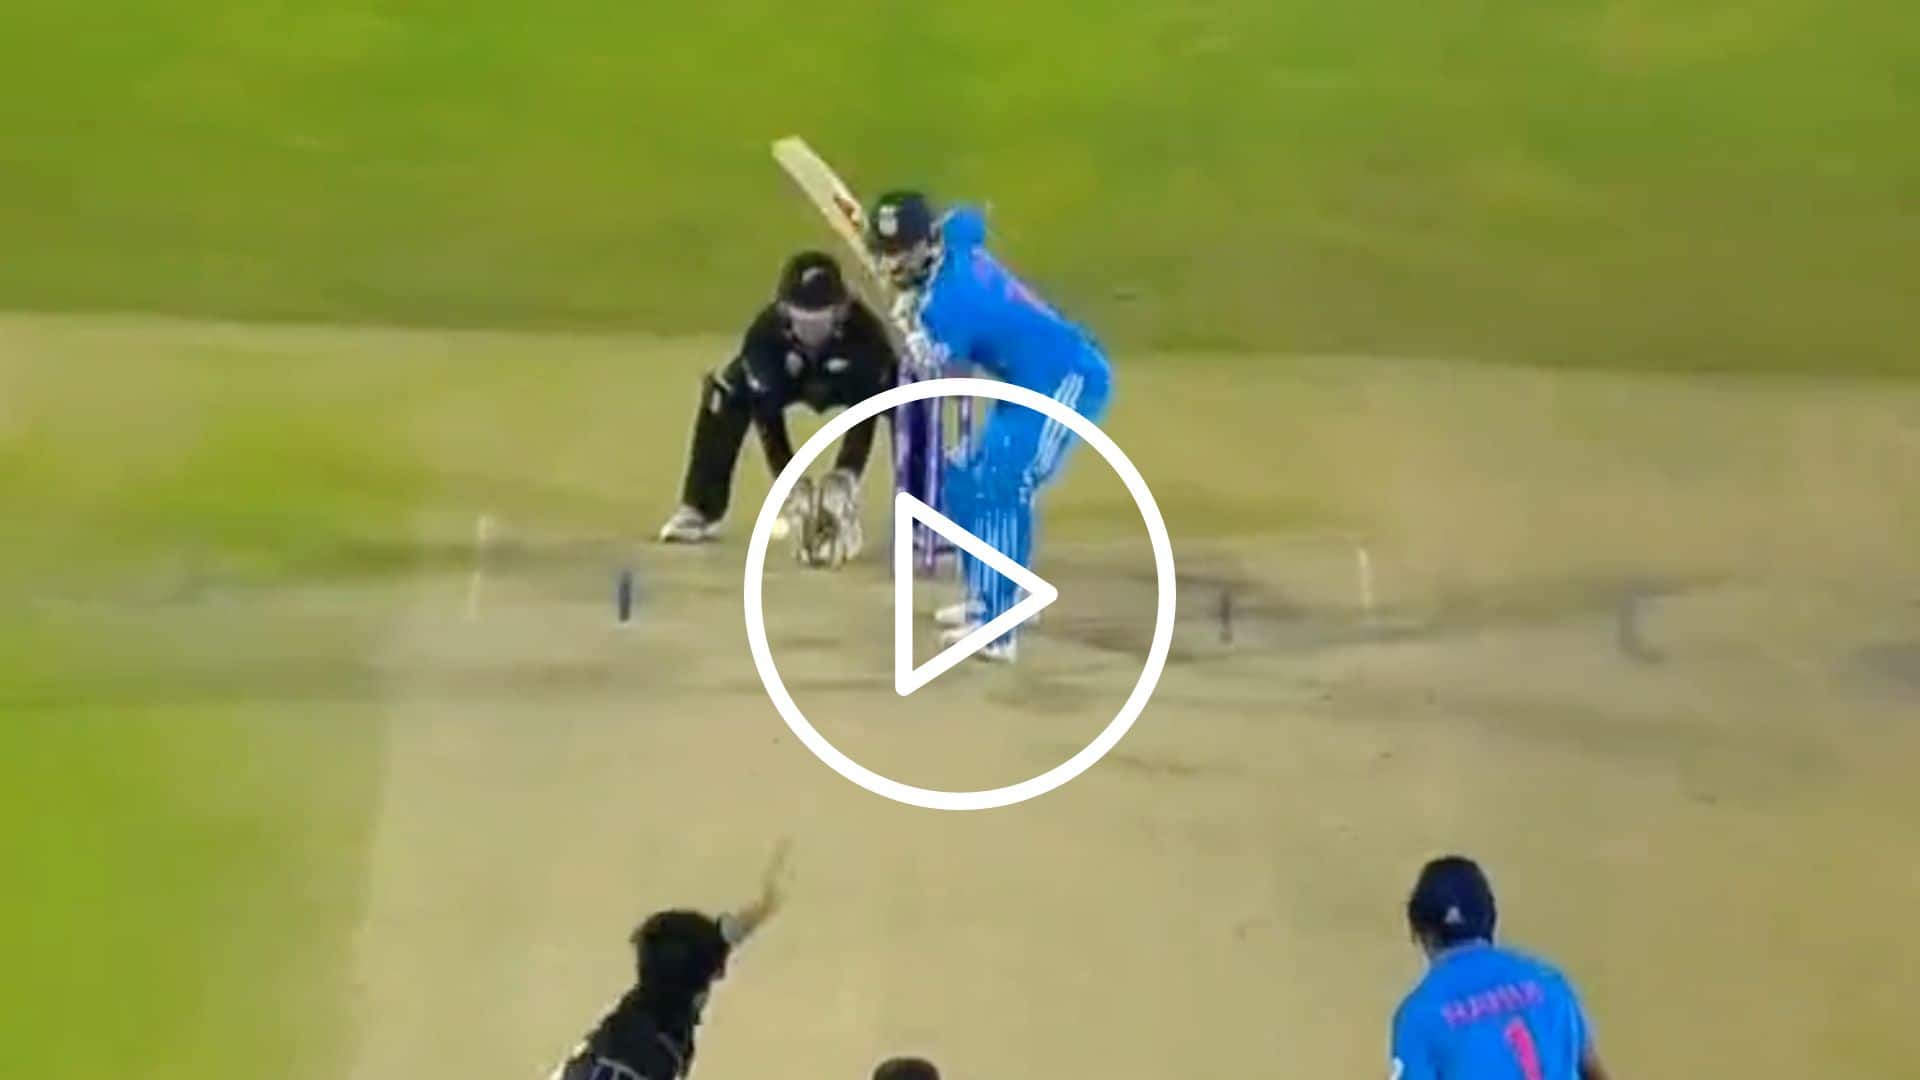 [Watch] Virat Kohli's ‘Gorgeous’ Inside-Out Lofted Drive For Six Over Extra Cover